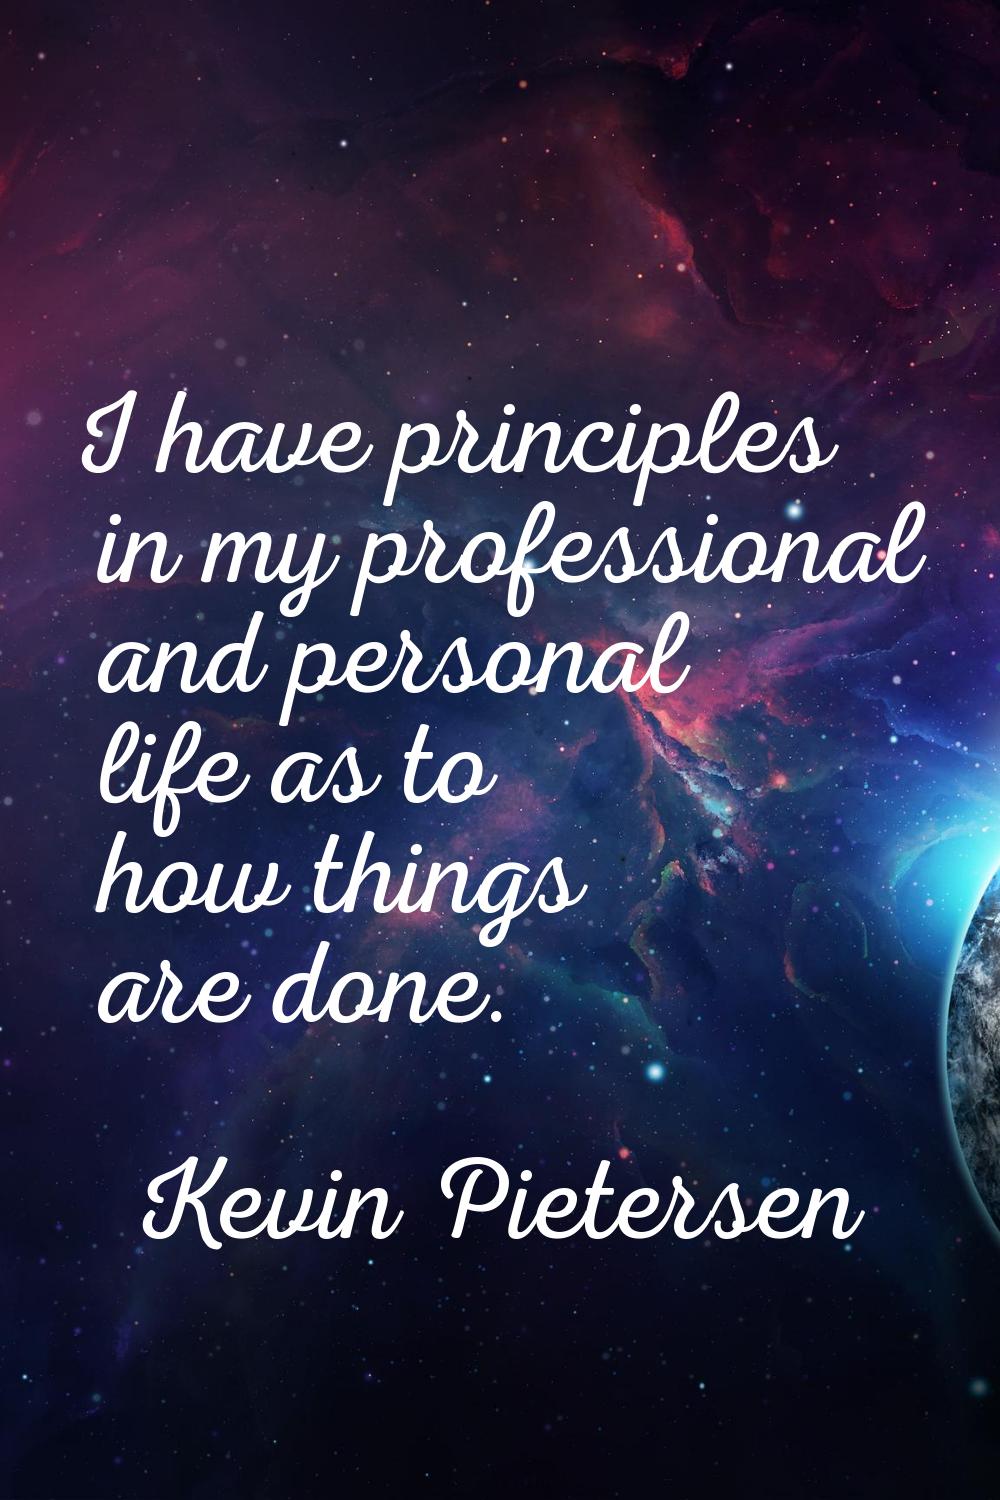 I have principles in my professional and personal life as to how things are done.